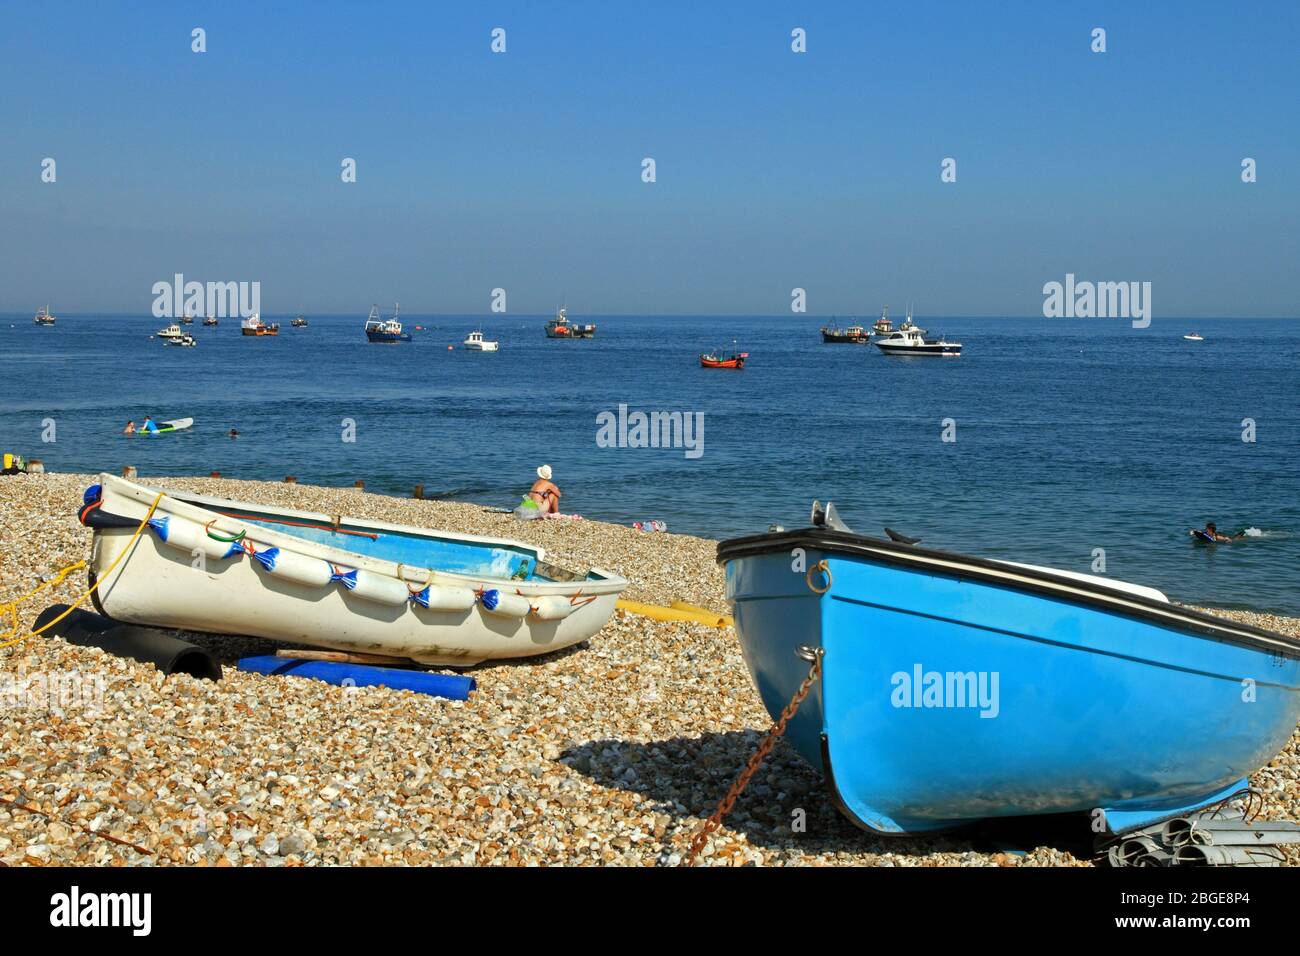 Boats on the beach at Selsey, West Sussex, England. Stock Photo